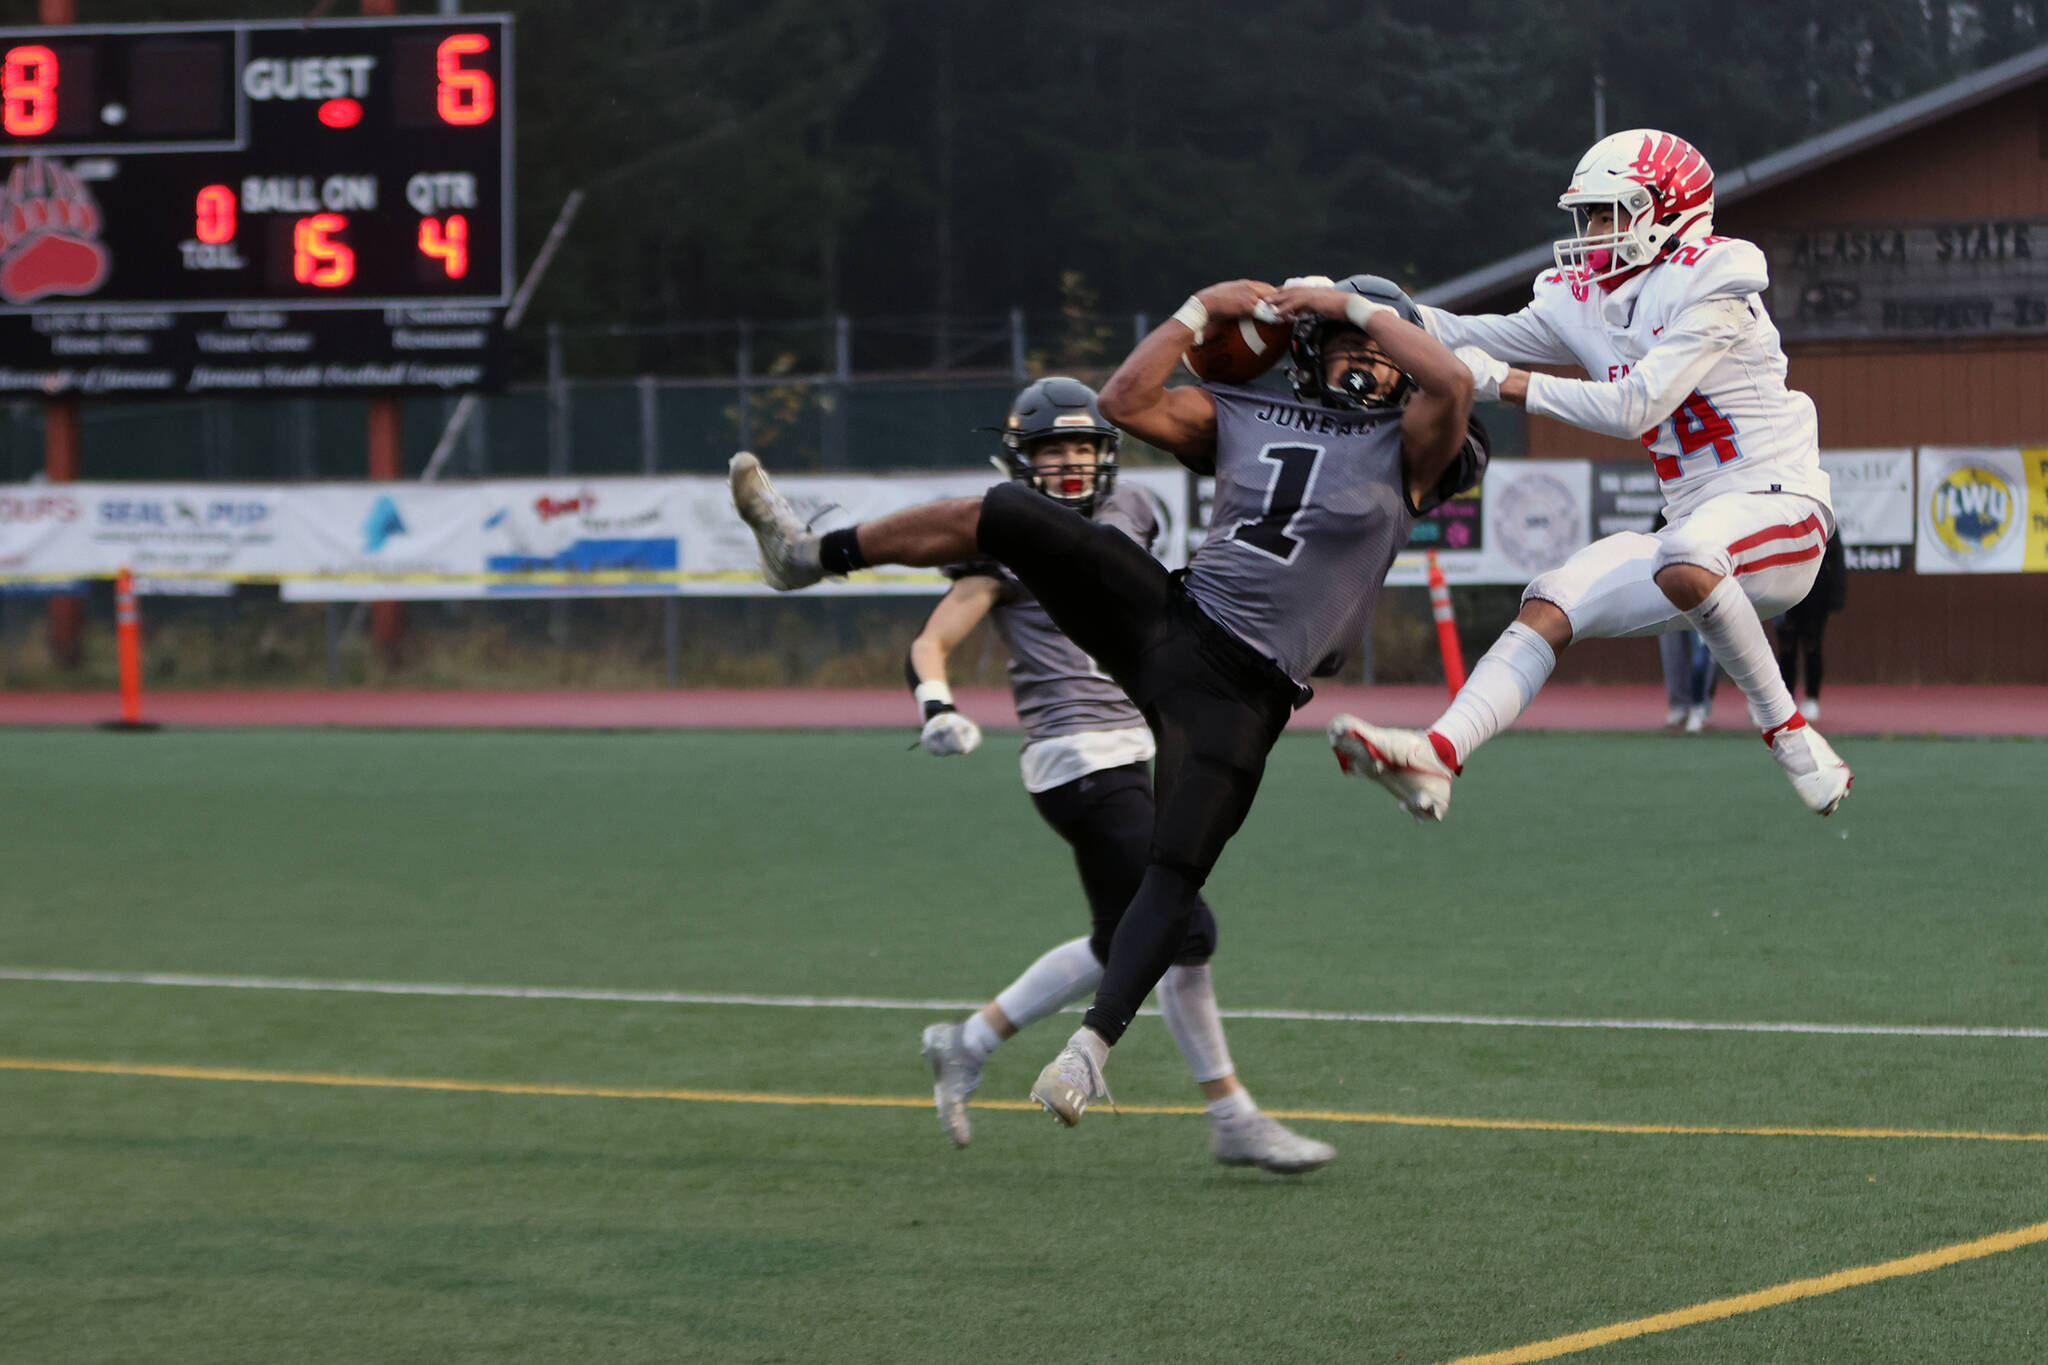 Jarrell Williams comes down with an interception in the end zone to put an end to an East scoring threat and the ball game. Williams had a big game on both sides of the ball in Juneau’s semi-finals victory against Bettye Davis East Anchorage High School.